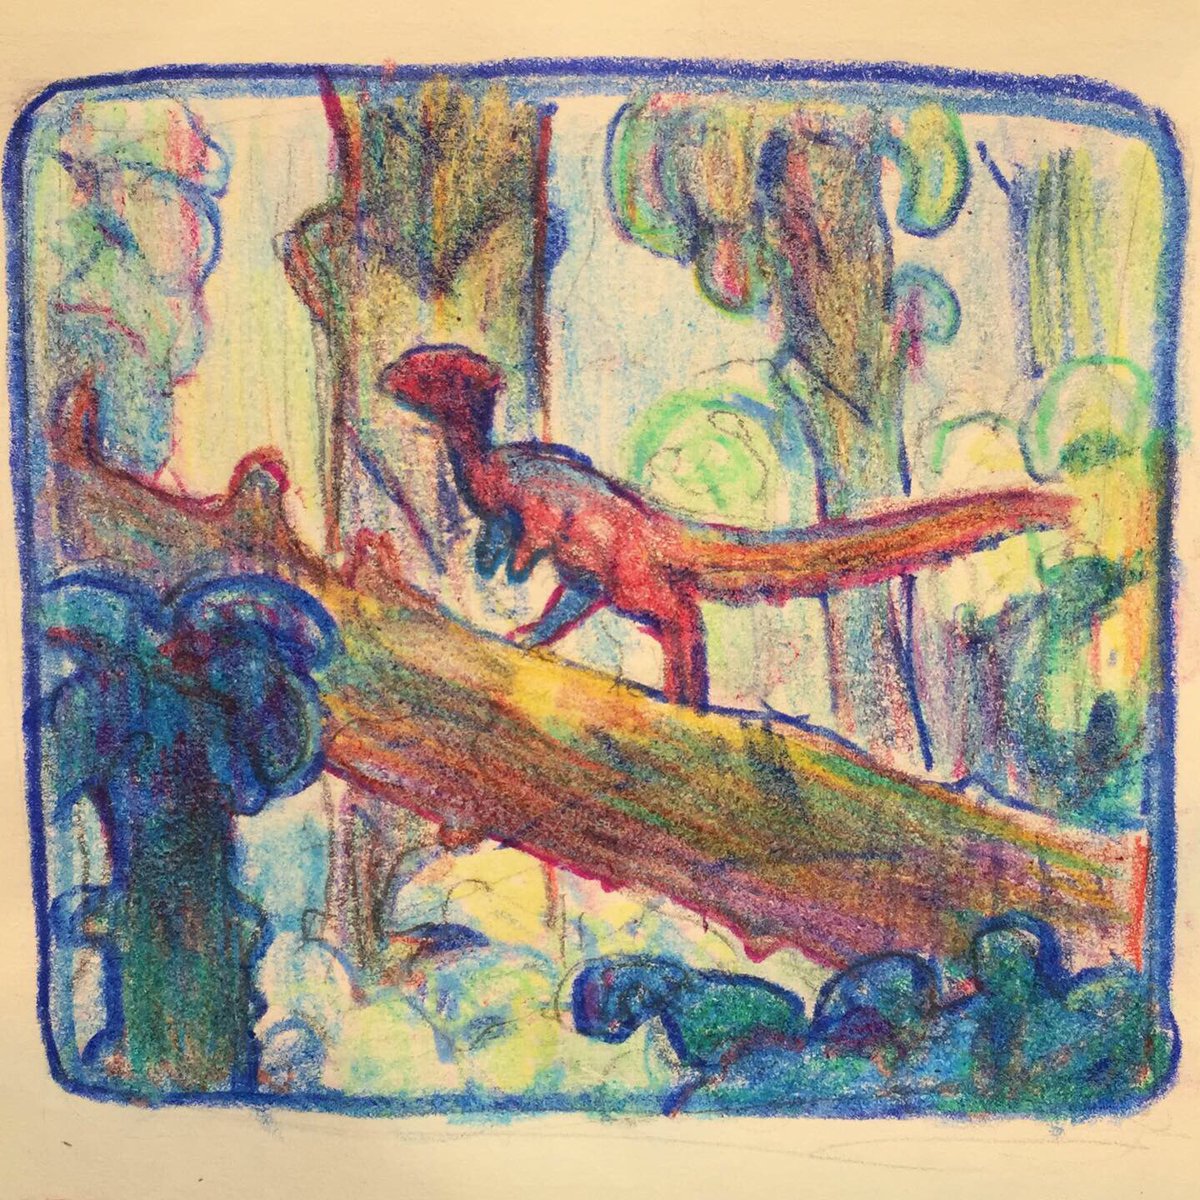 I've been making little thumbnails in crayon and color pencil after work in my sketchbook. Making more tactile art and with such low commitment materials has honestly been something I've been finding really centering in the midst of these hazy days in CA 